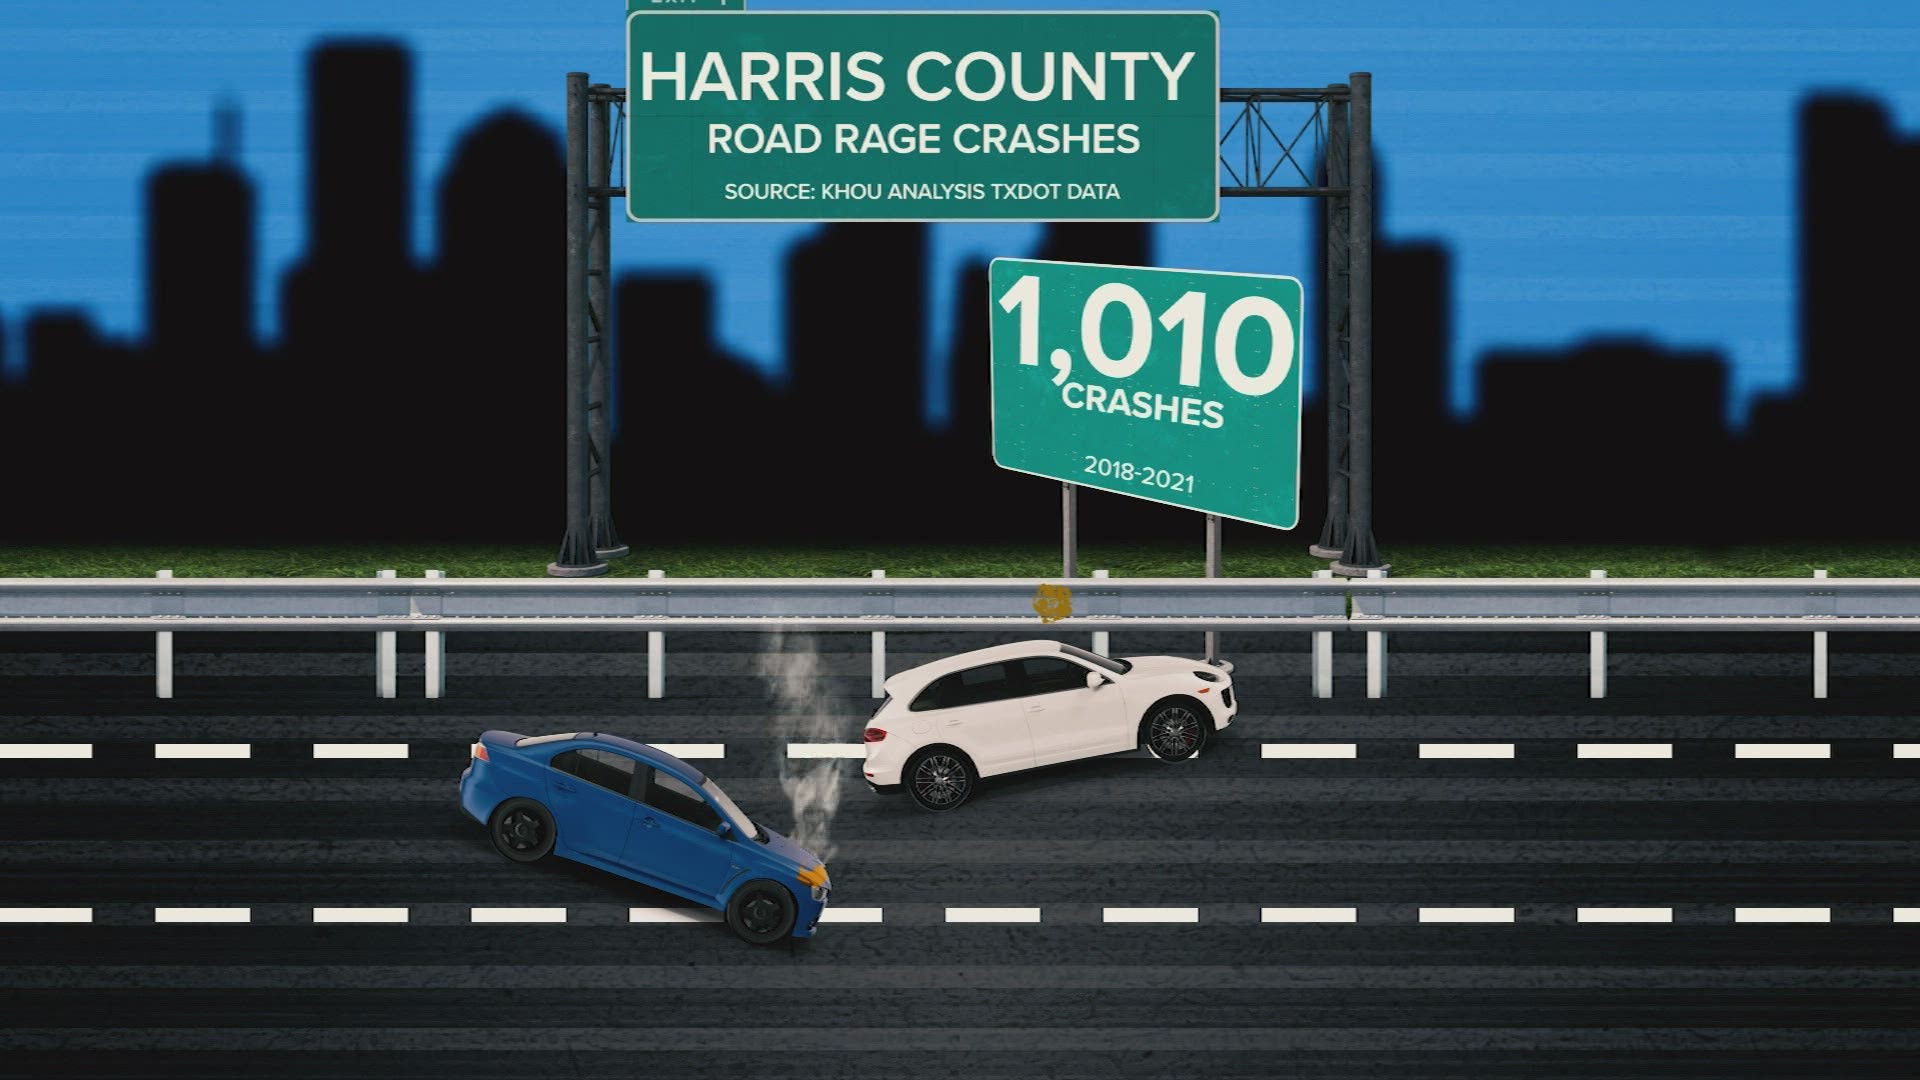 Crash records show road rage is getting worse, especially in certain hot spots around Harris County.